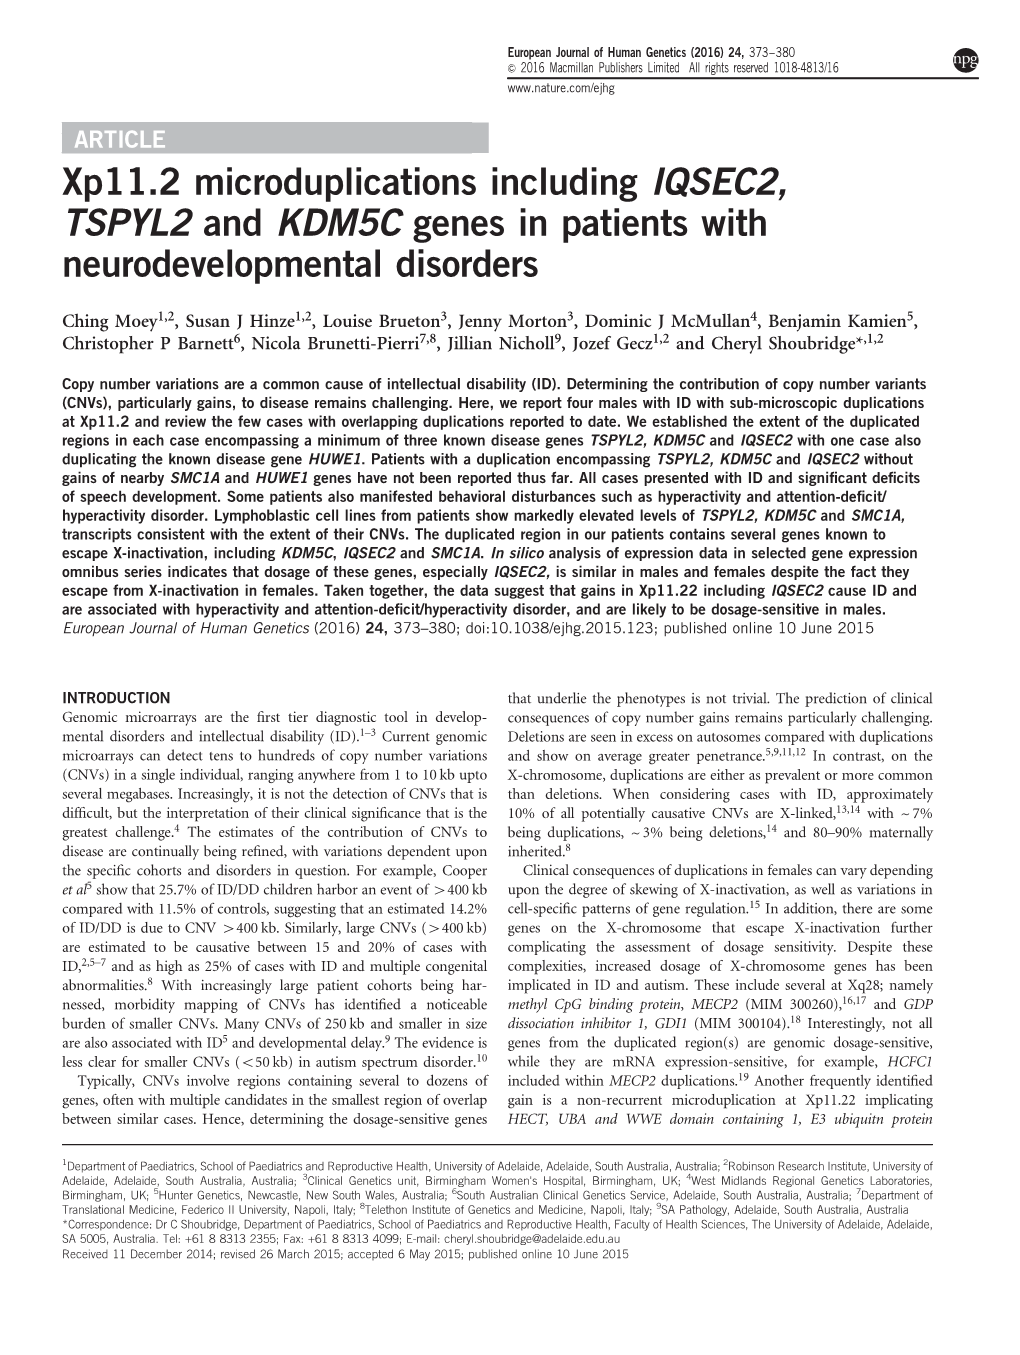 Xp11.2 Microduplications Including IQSEC2, TSPYL2 and KDM5C Genes in Patients with Neurodevelopmental Disorders